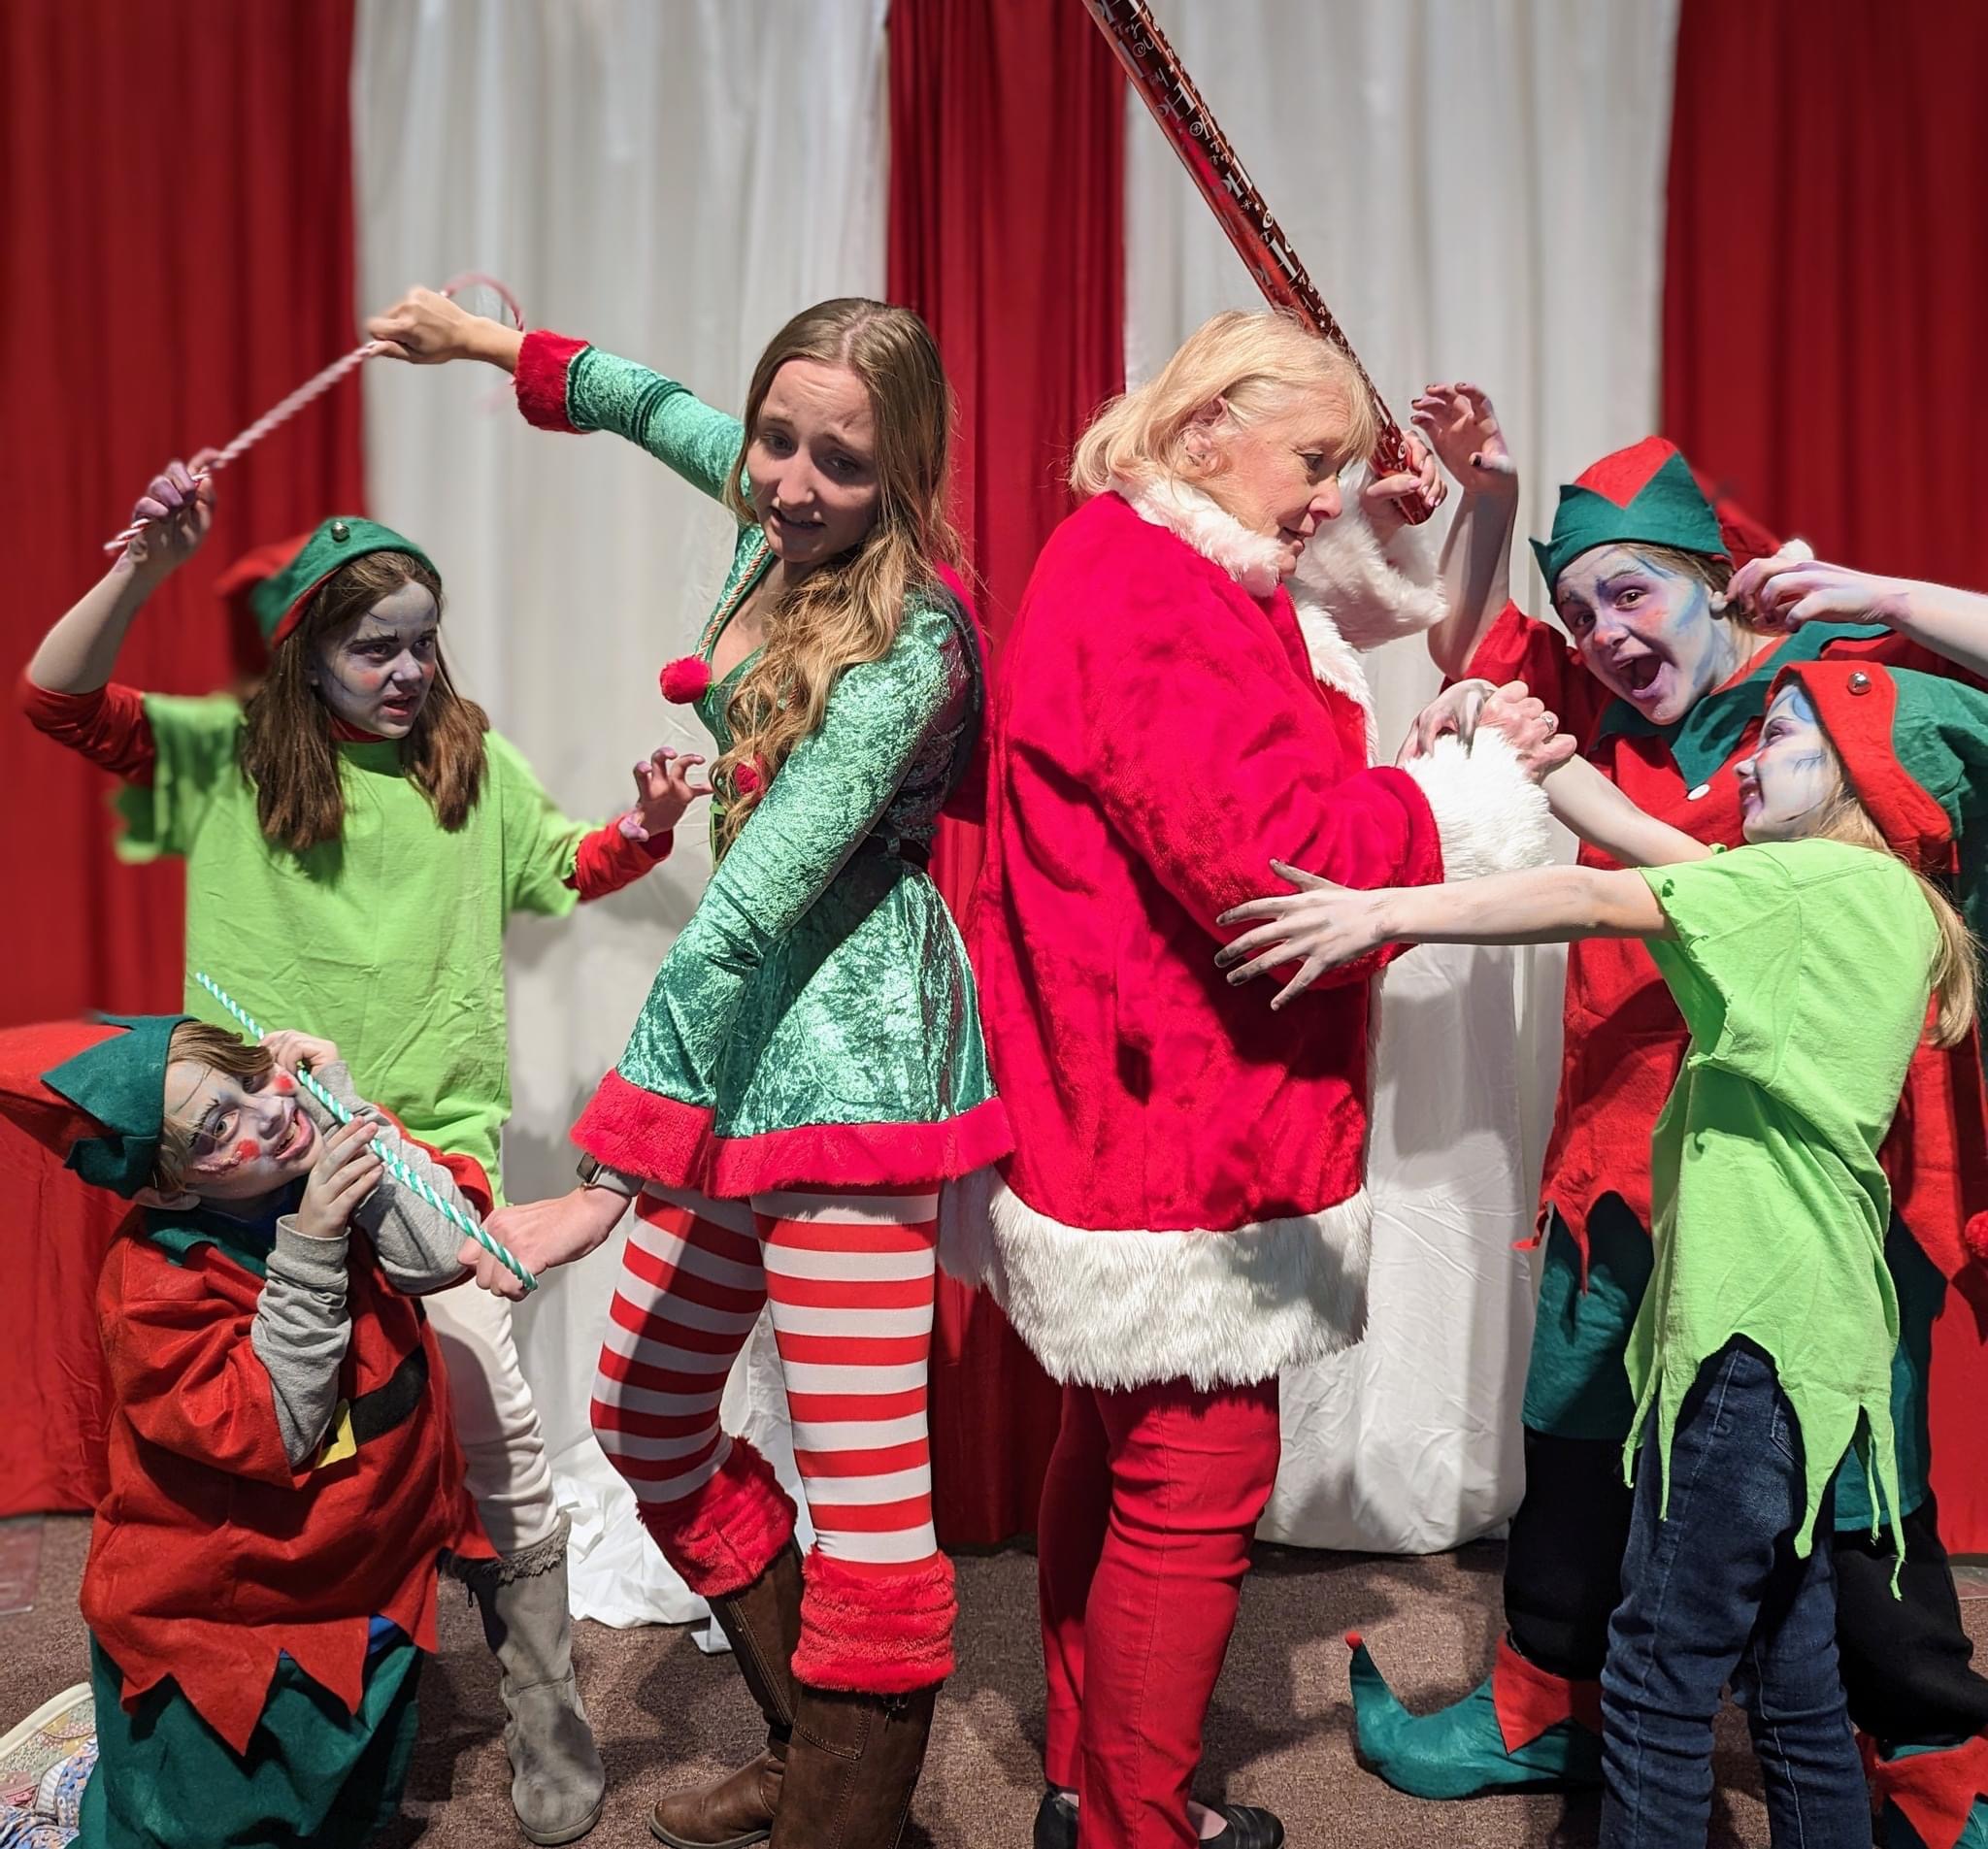 Why have one heroine when you can have two? Come and see if Merry Tidings and Mrs. Claus can save Christmas from zombies! 